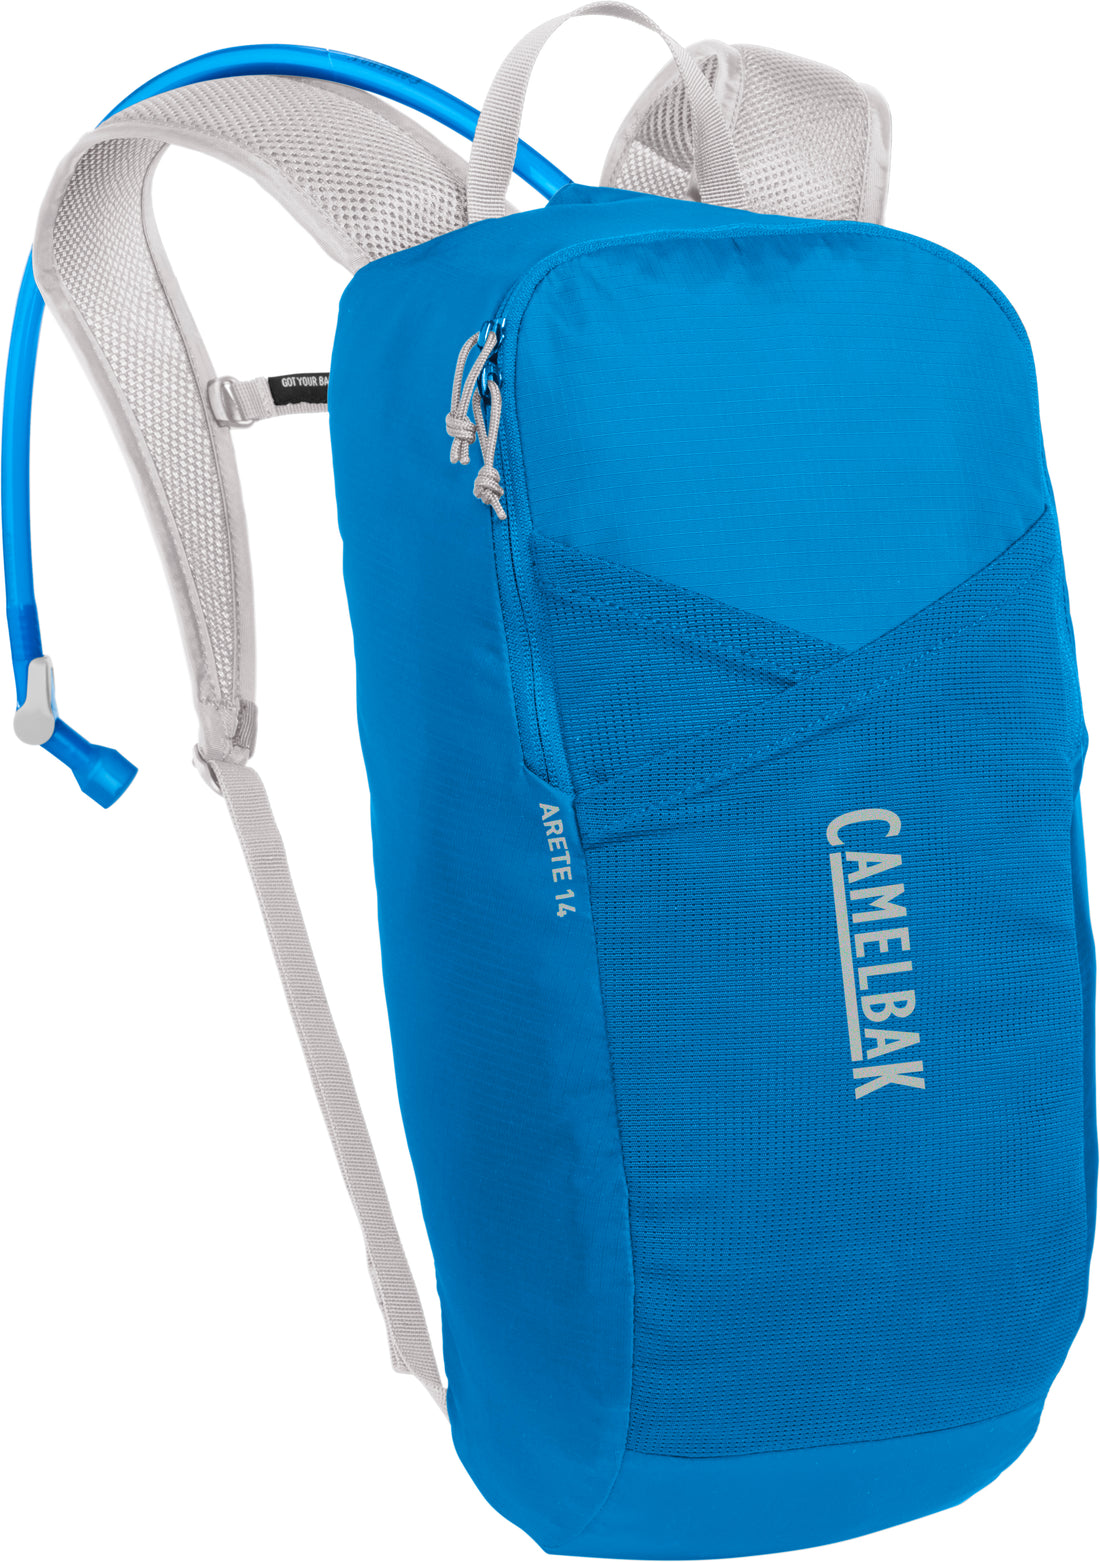 Camelbak|ARETE_14|Cycle_LM